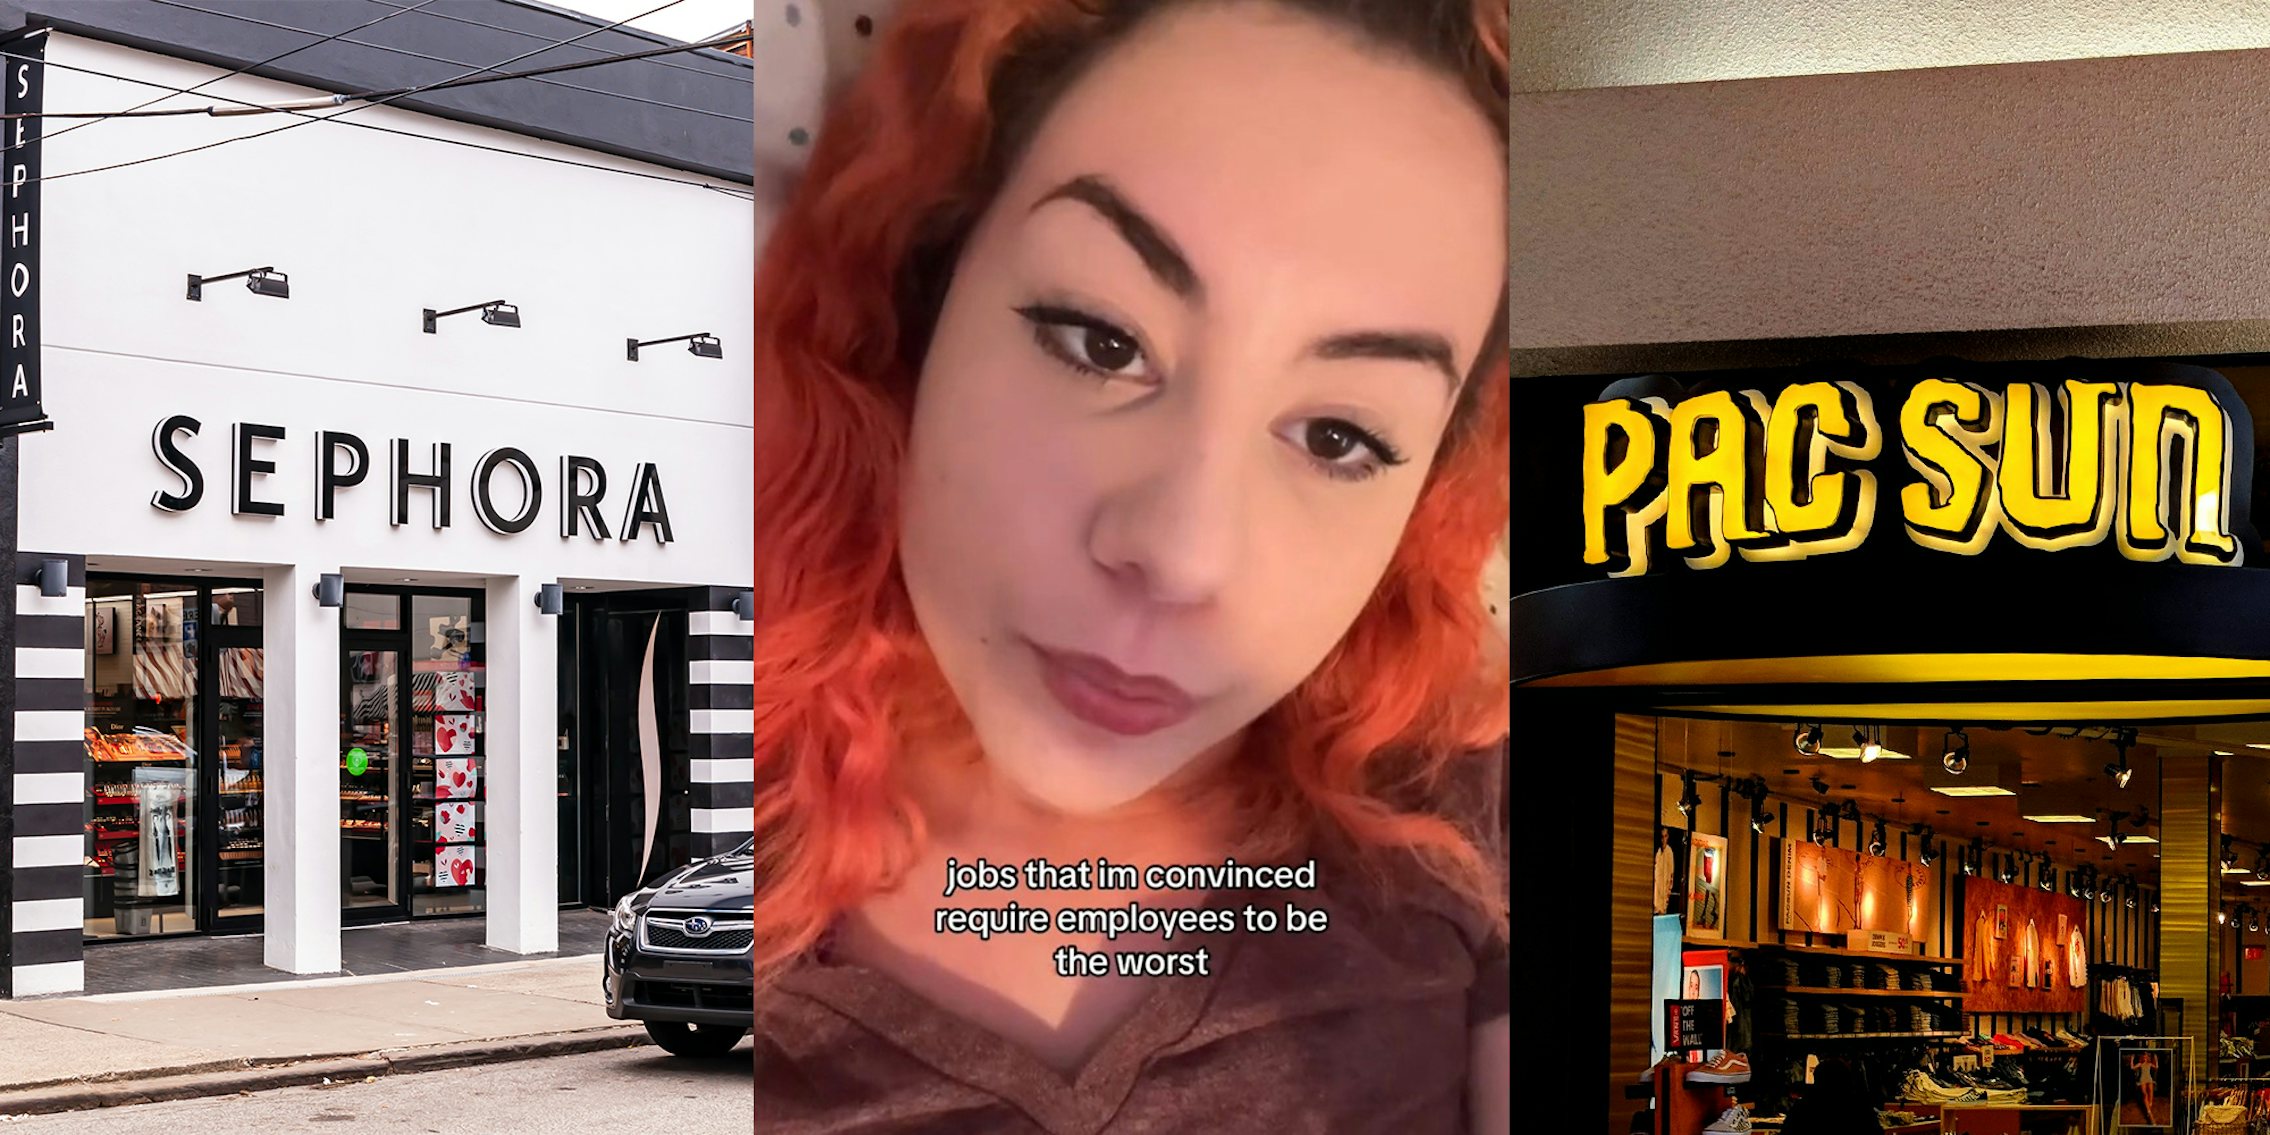 Customer says Sephora and Pacsun have the ‘worst’ employees